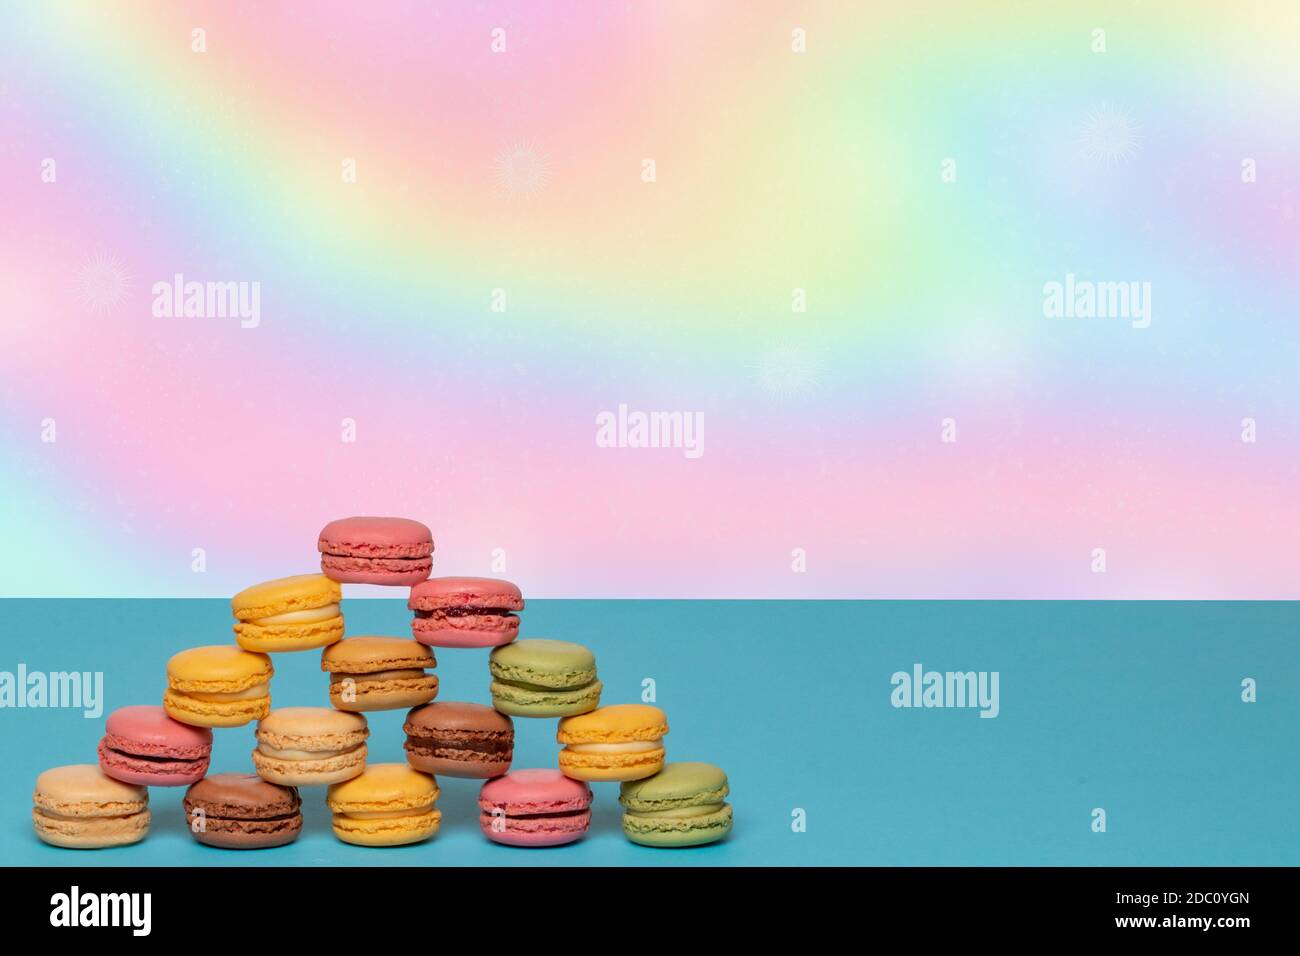 Macaron pyramids. Close-up of colourful French macaroons in shape of a pyramid on a blue table against abstract bright pastel colored background. Adve Stock Photo